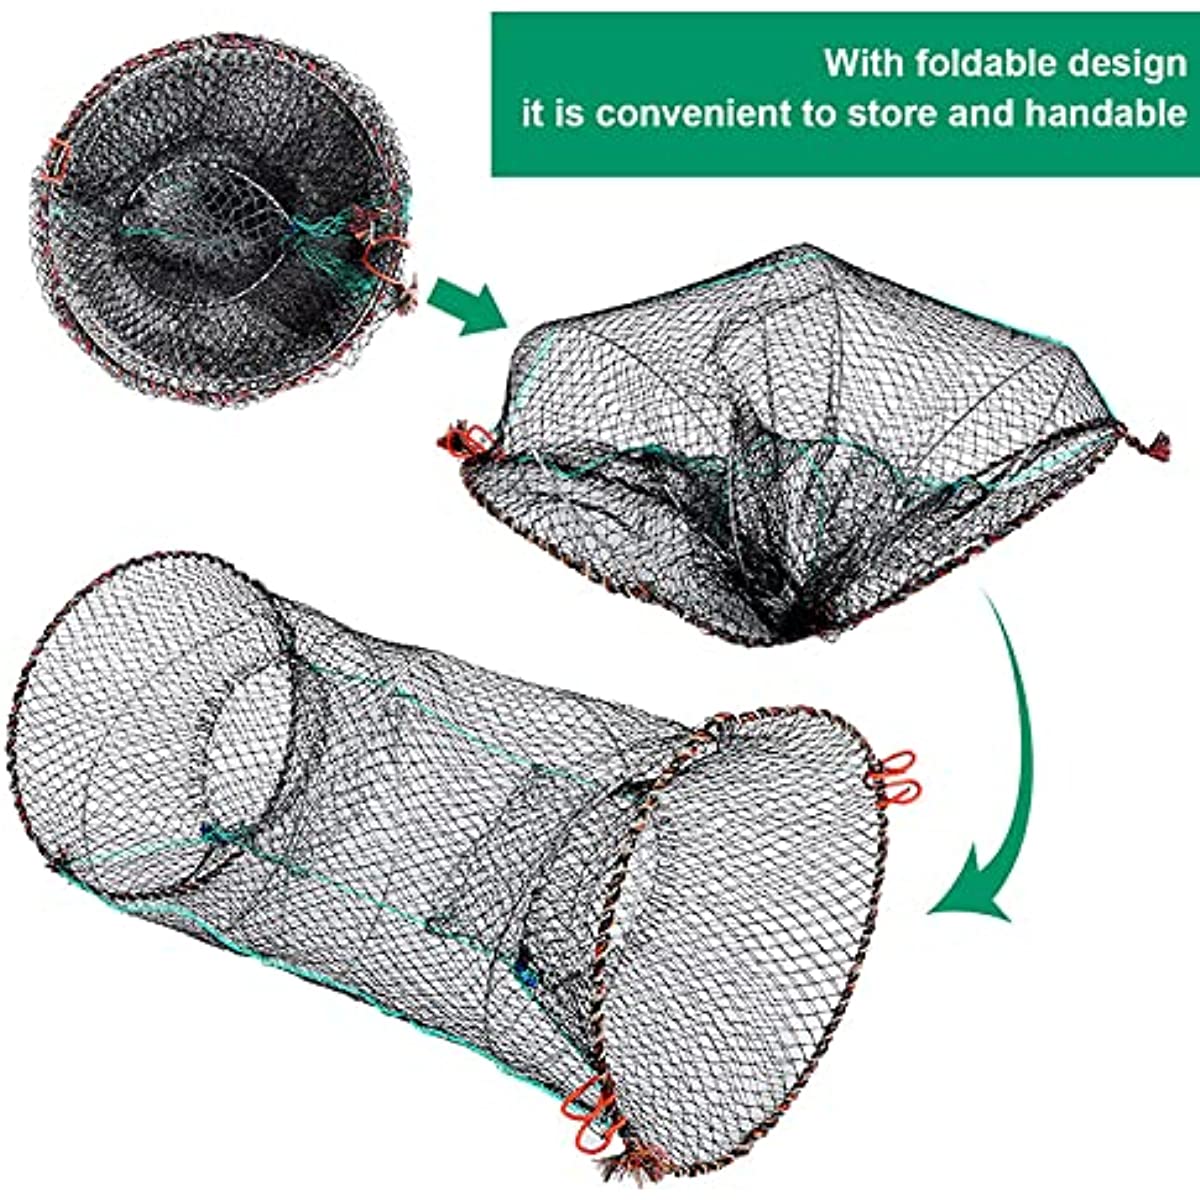 2 packs Collapsible Fishing Bait Trap for Crab, Minnow, Crawfish, Lobster,  and Shrimp - Portable Cast Net with Foldable Design and Accessories Include